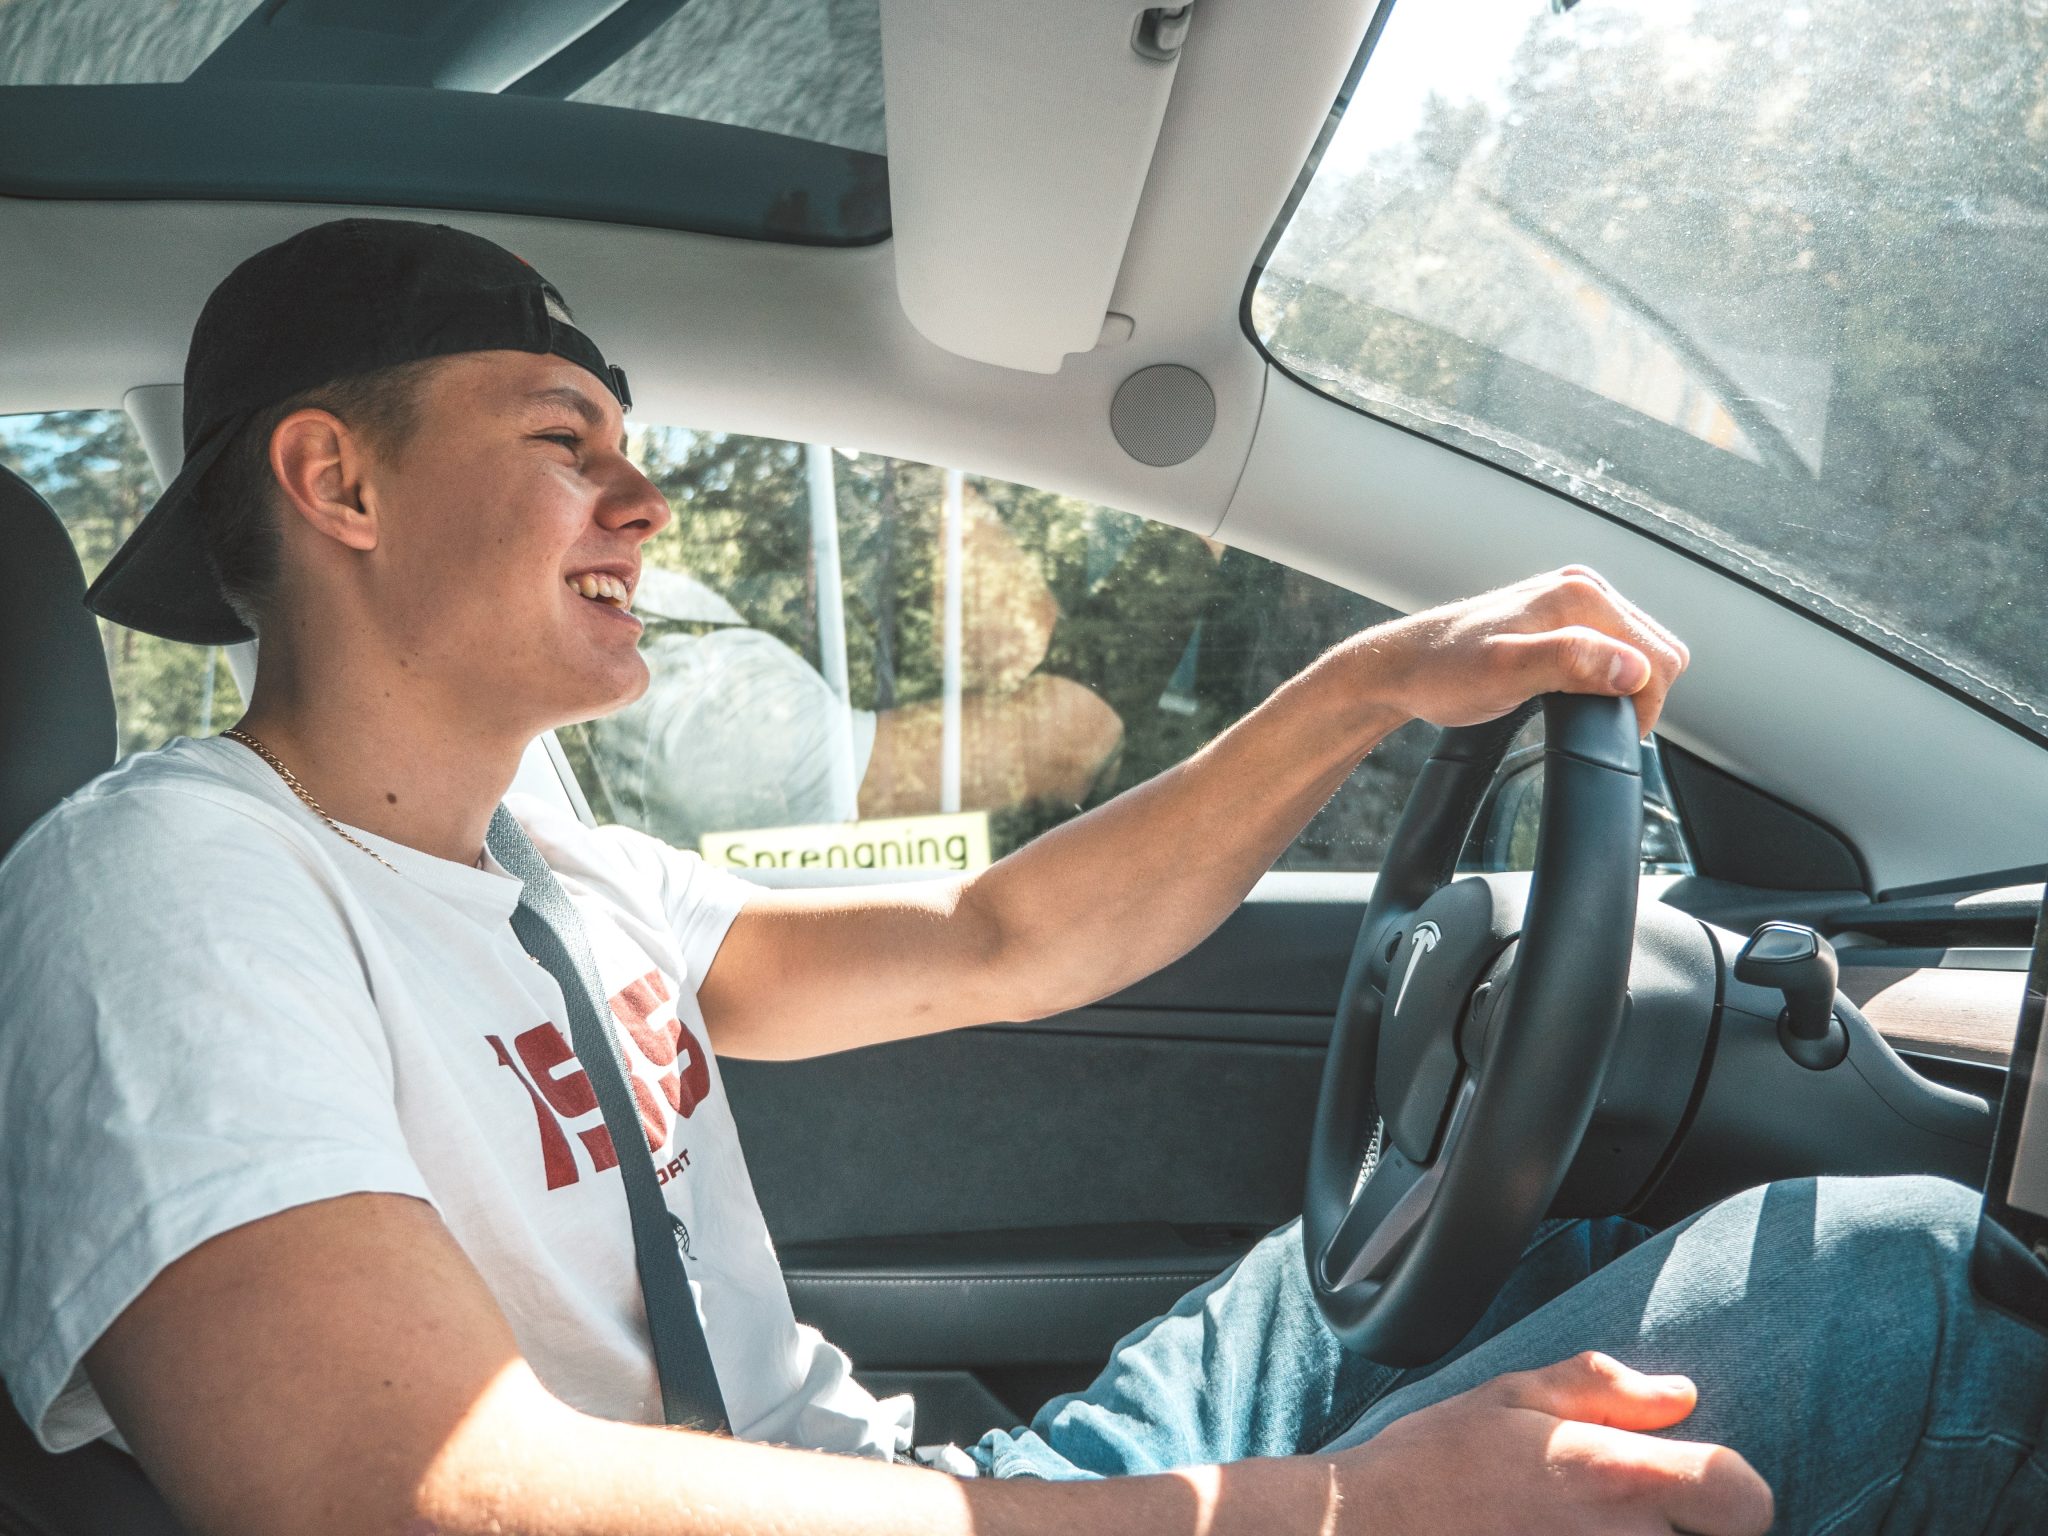 What Is the Driver’s Ed Course in Georgia